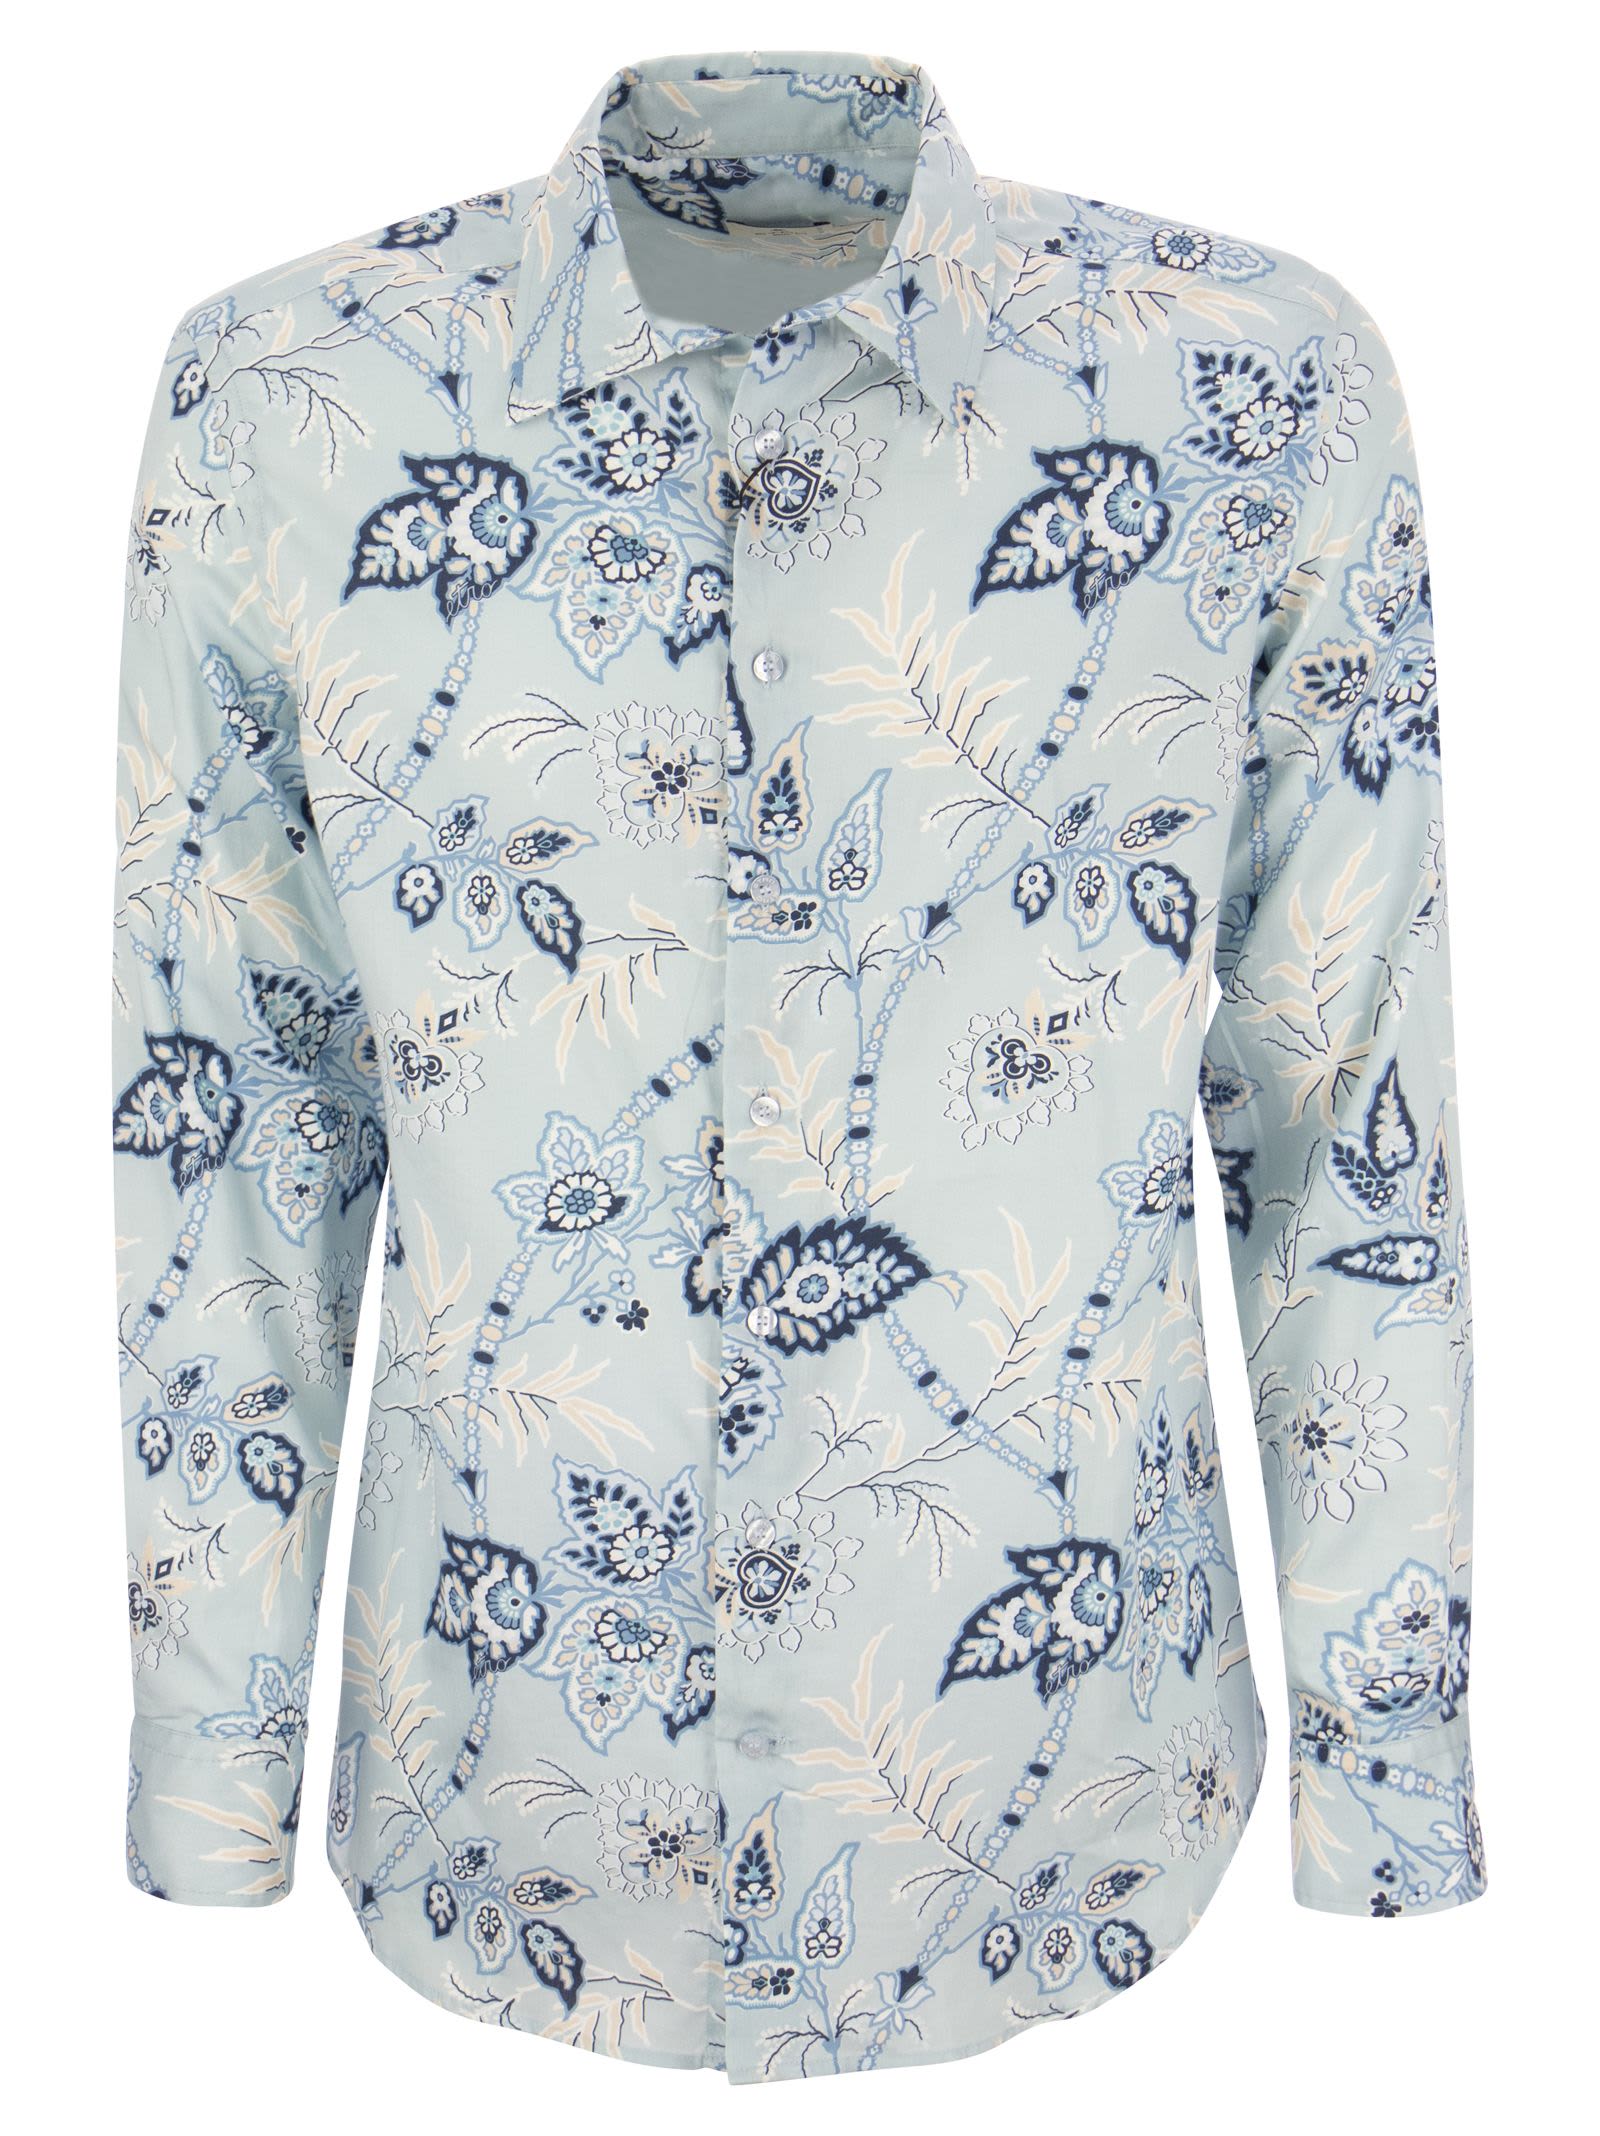 Jacquard Shirt With Floral Pattern